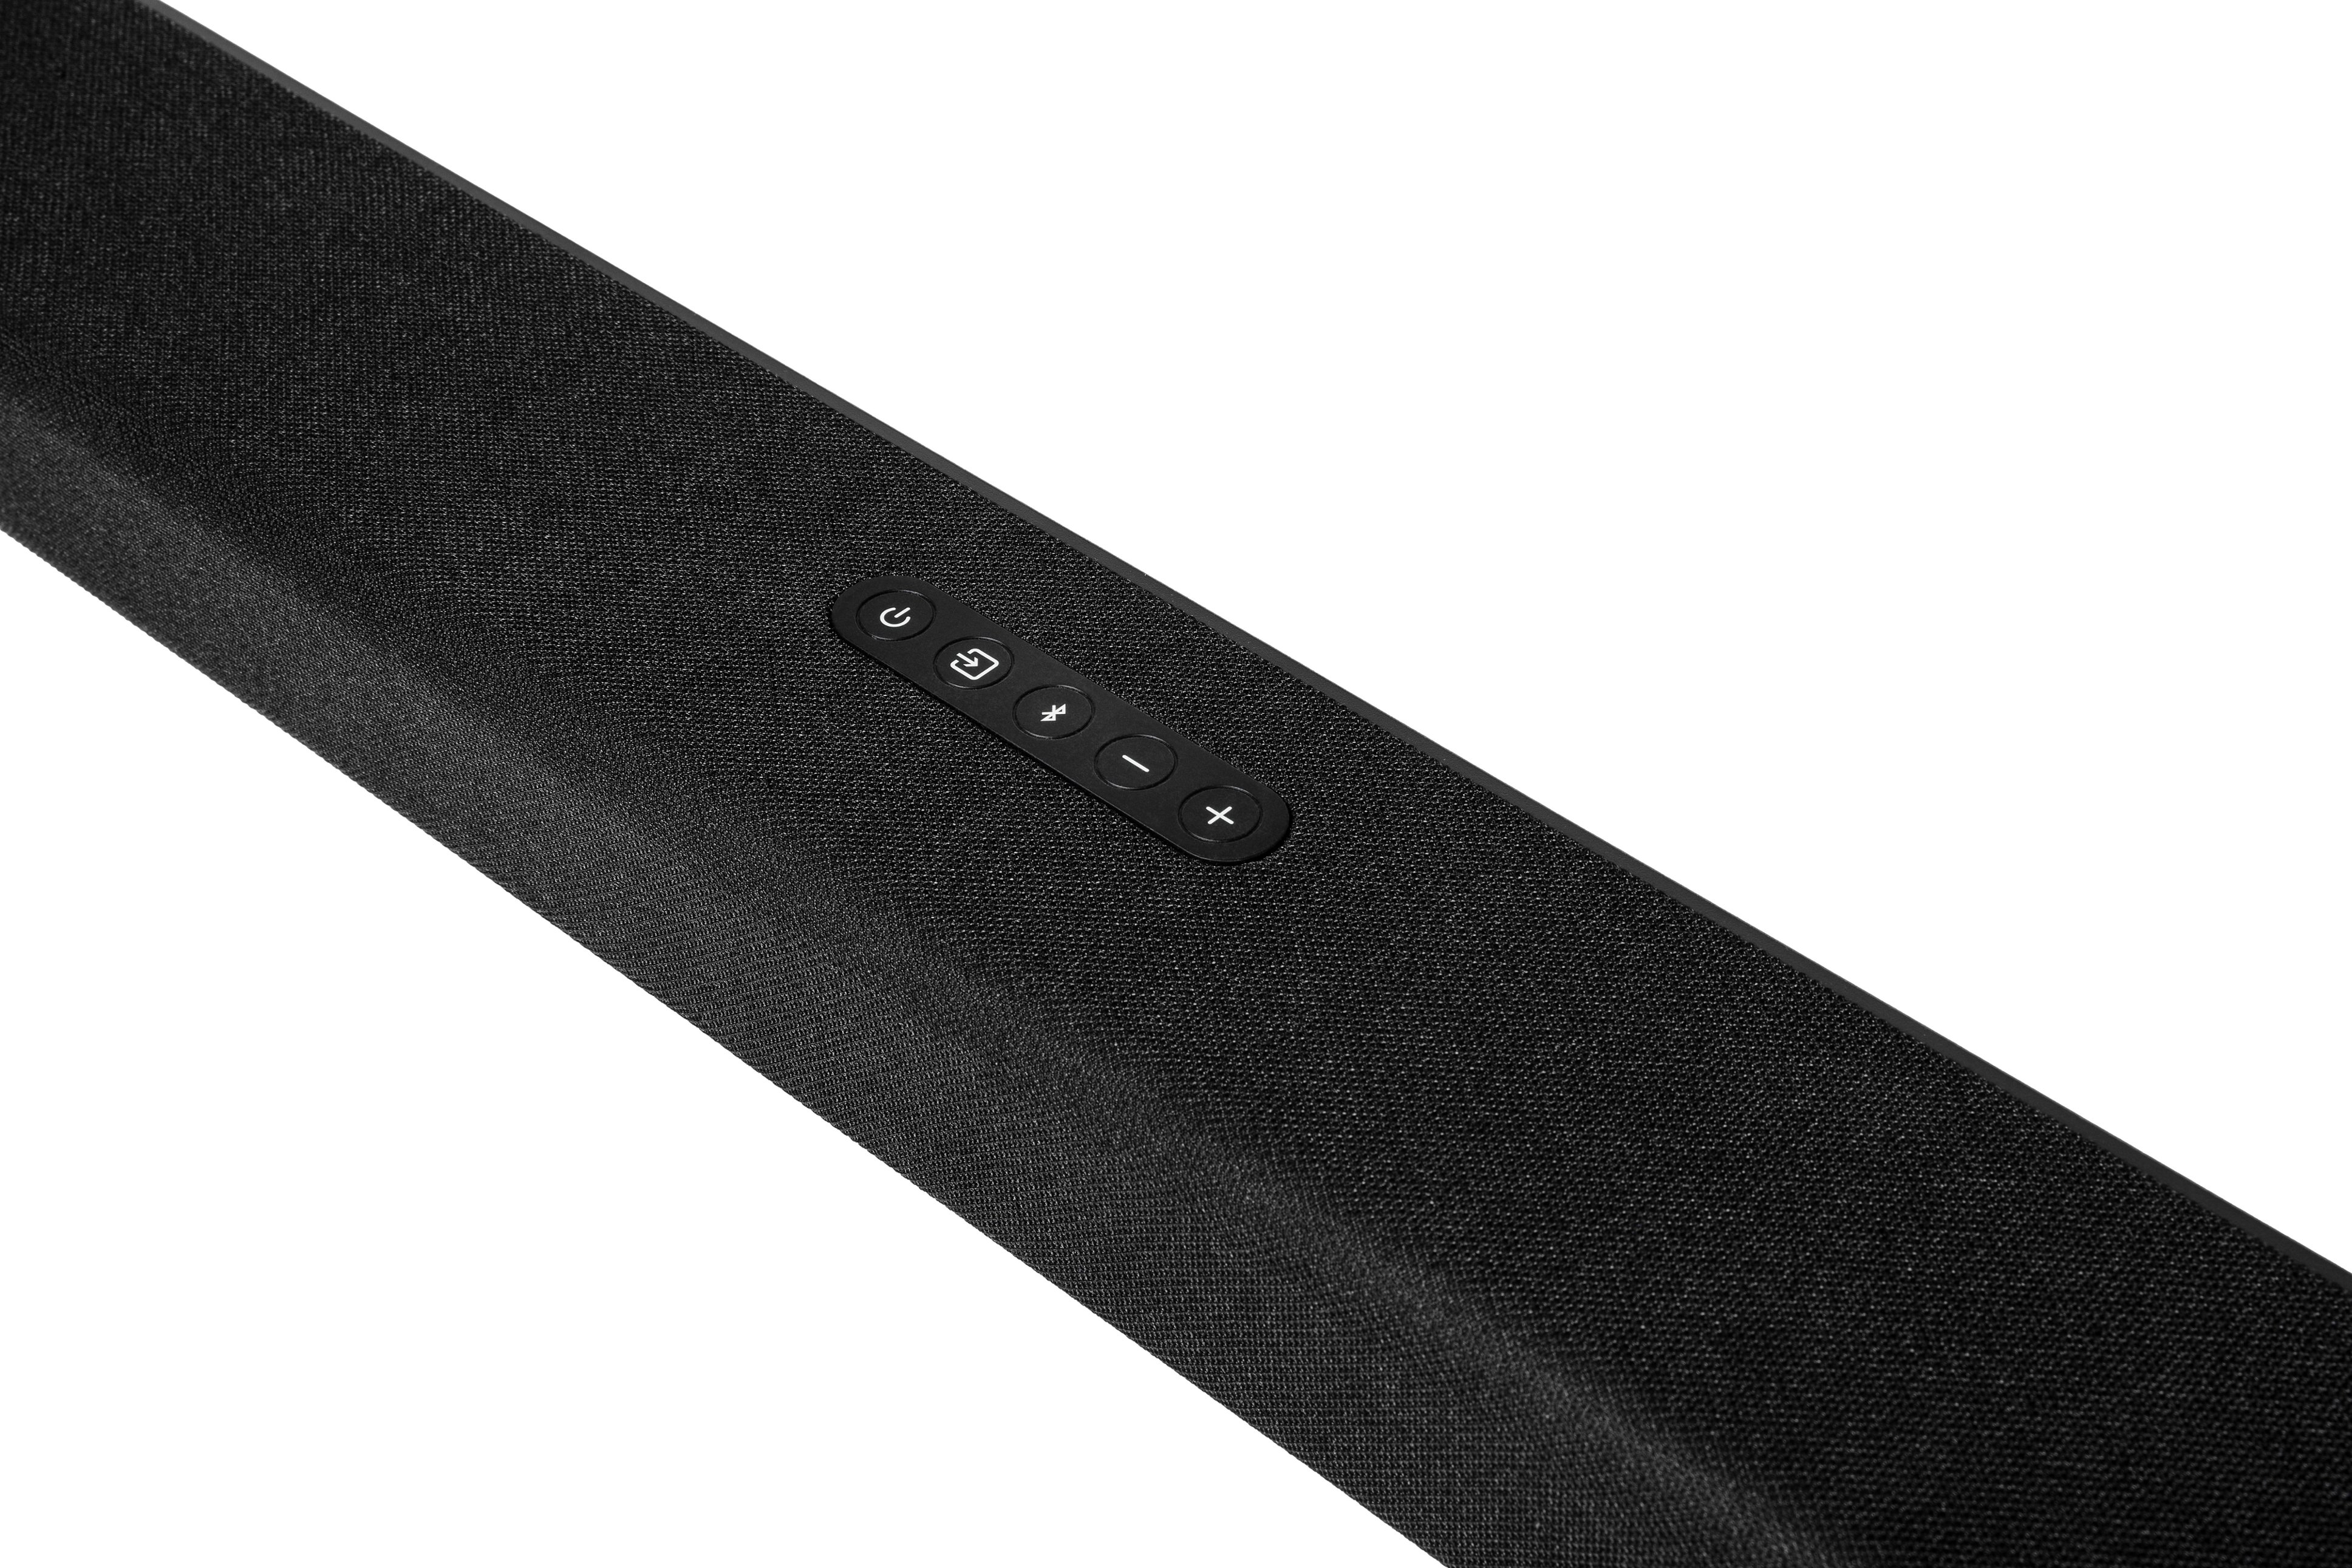 Angle View: Polk Audio - Signa S4 3.1.2 Ch Ultra-Slim TV Sound Bar with Dolby Atmos and VoiceAdjust - Black